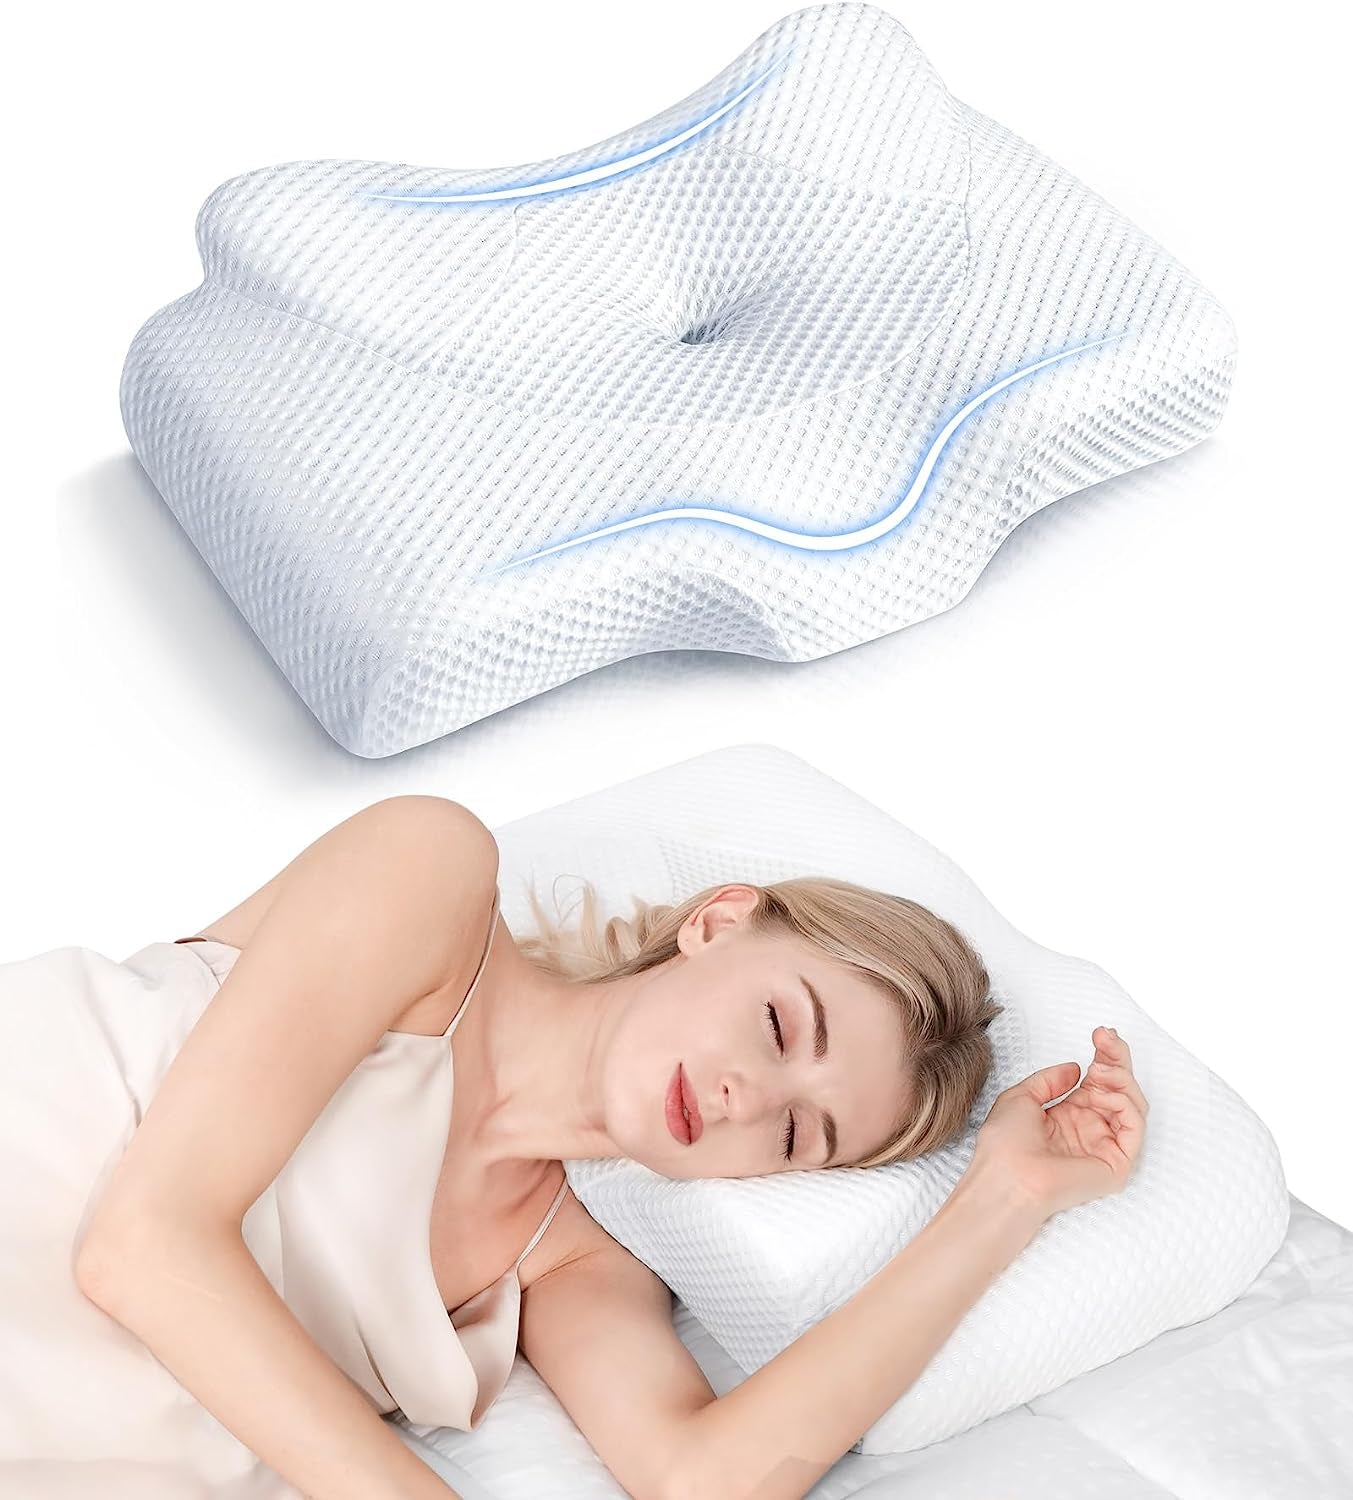 Orthopedic Cervical Pillow for Neck Pain Relief with Cooling Case